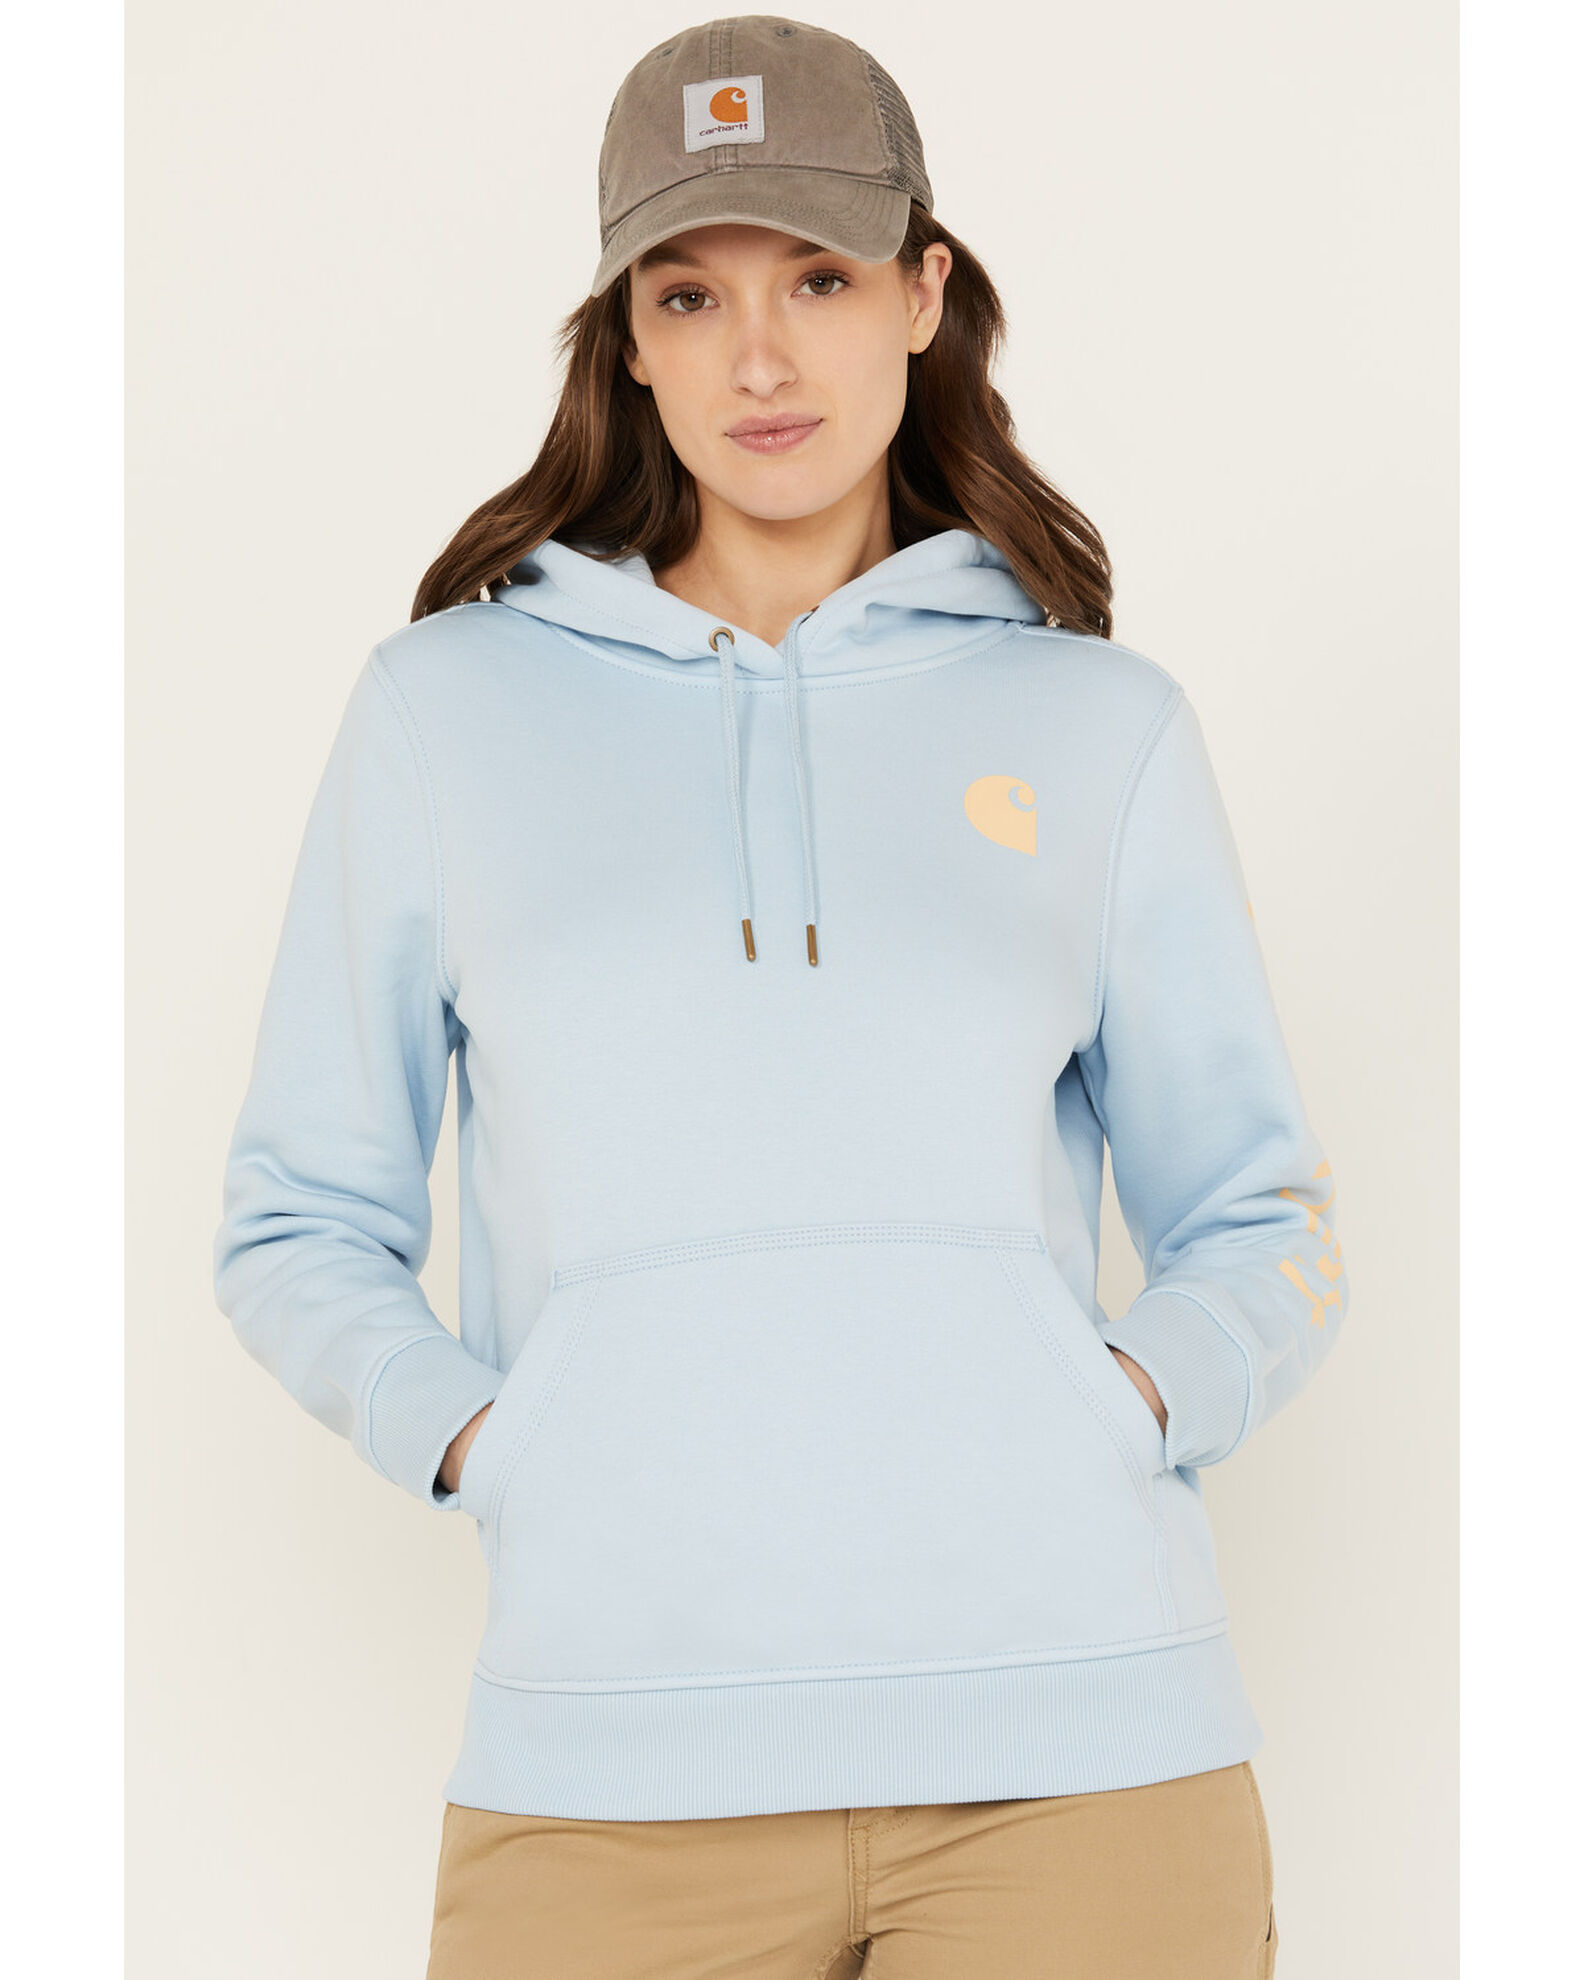 Carhartt Women's Relaxed Fit Midweight Logo Graphic Hoodie